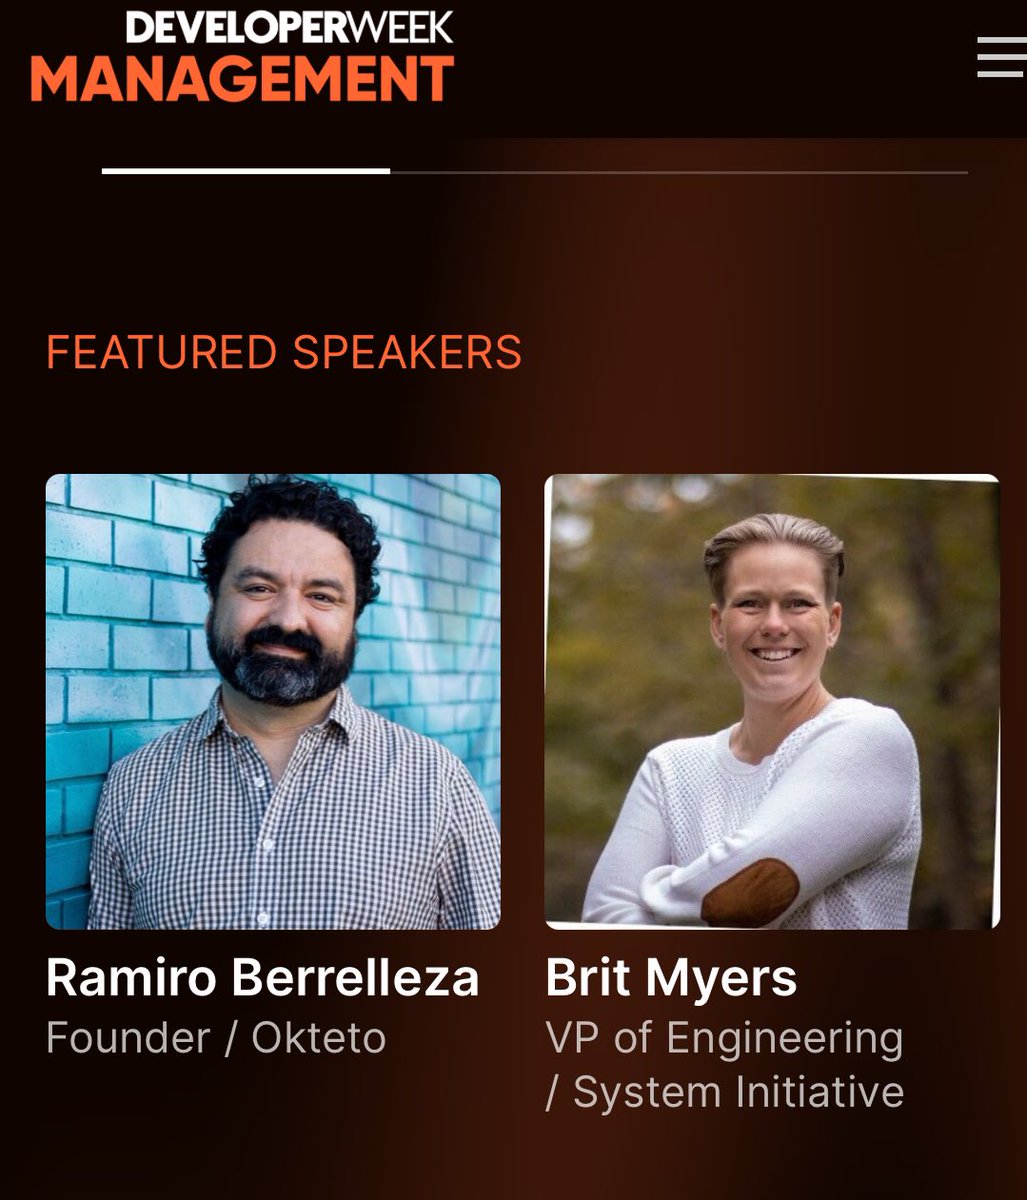 Feeling fancy as a featured speaker at @DeveloperWeek Management. I’m working on my talk about ROI of Developer Happiness and why engineering leaders need to measure. 

If you think about developer productivity and increasing business value through DevX initiatives join our